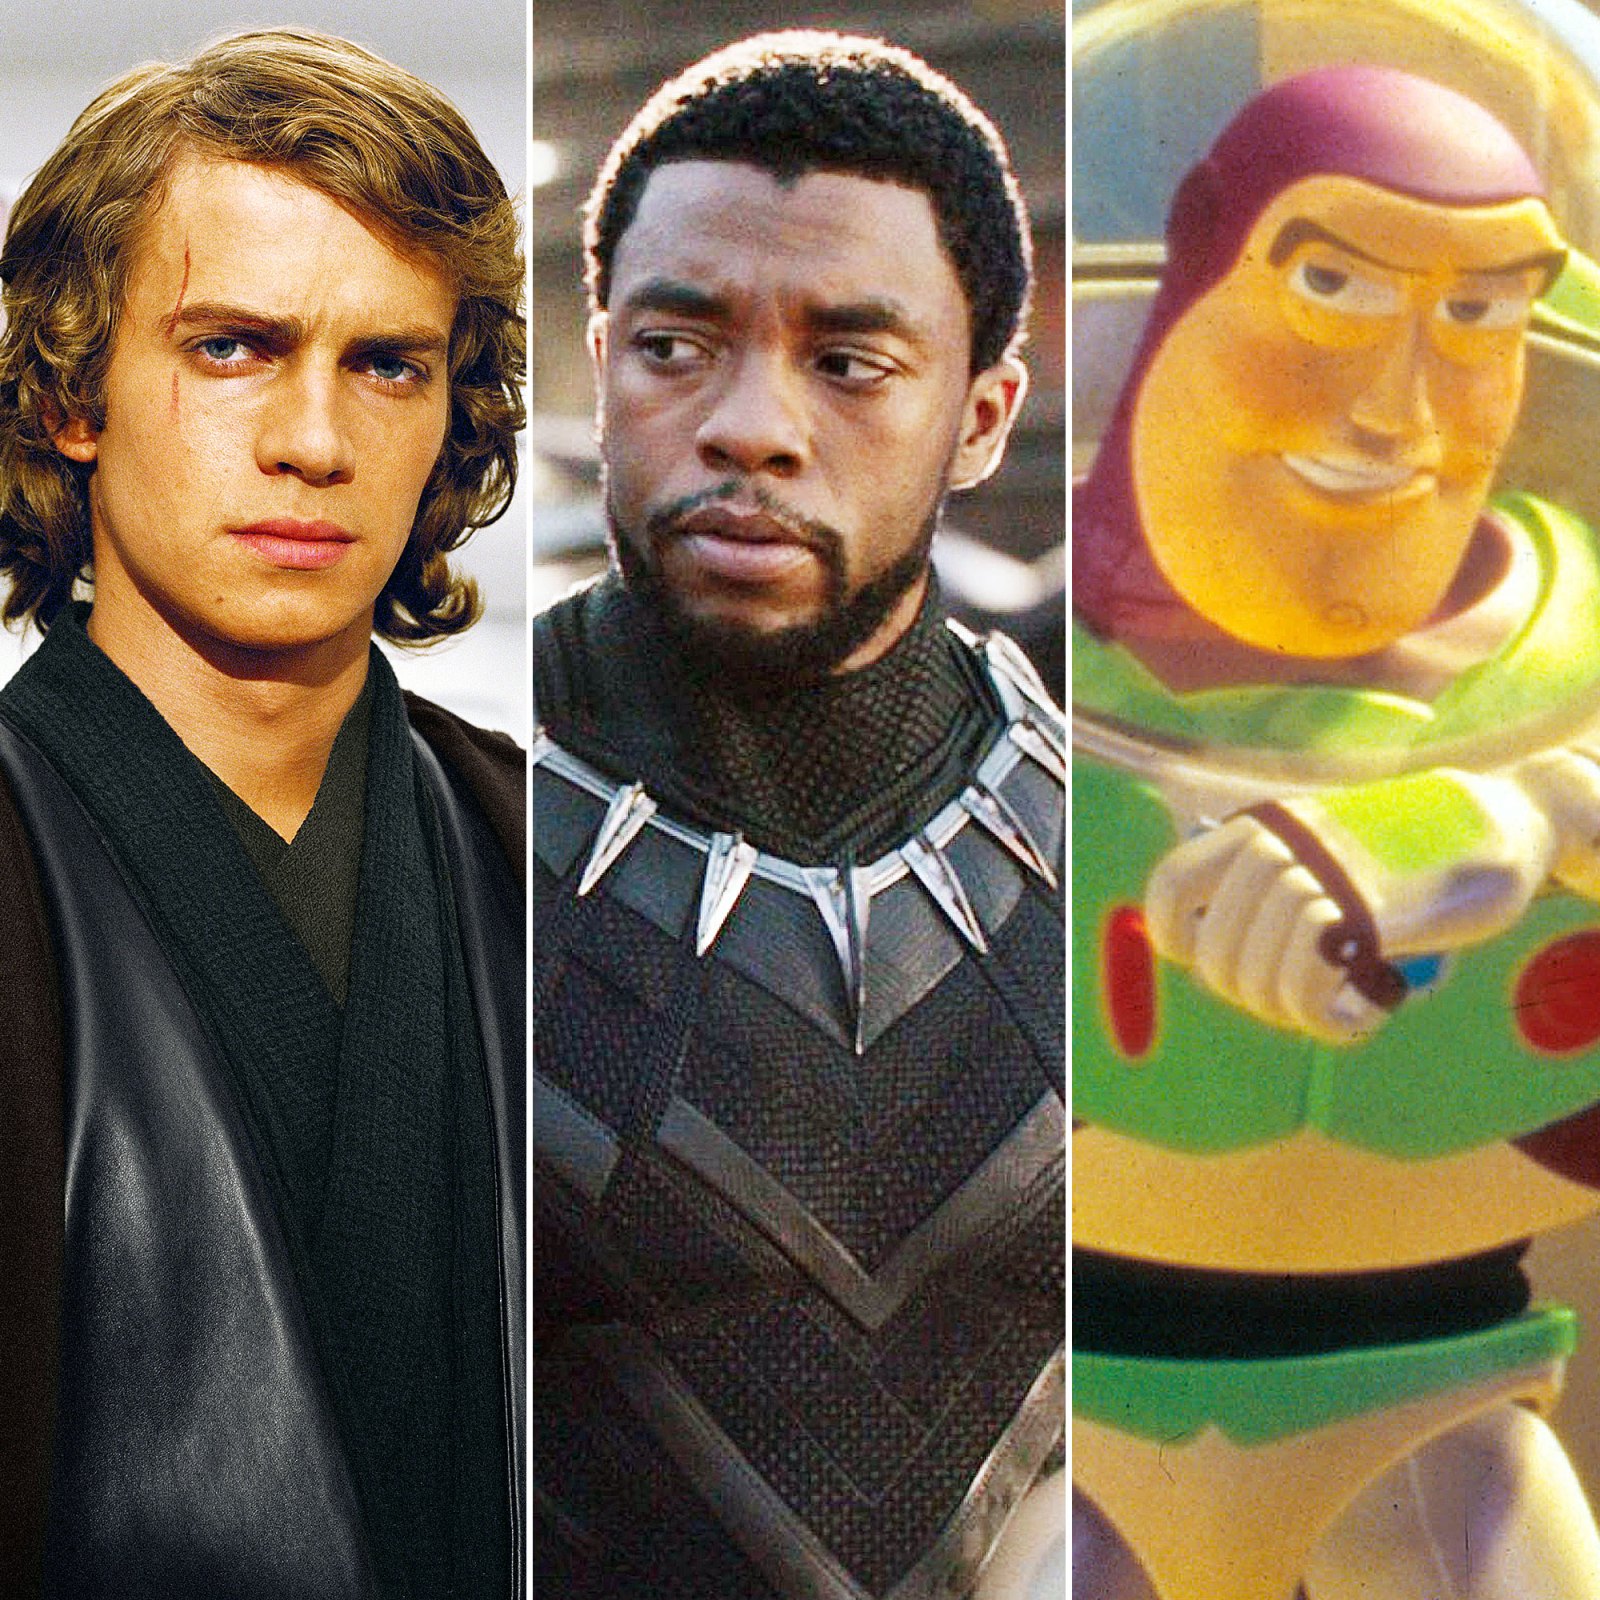 Hayden Christensen Chadwick Boseman and Buzz Lightyear The Biggest Projects Revealed During Disneys End-of-Year Event